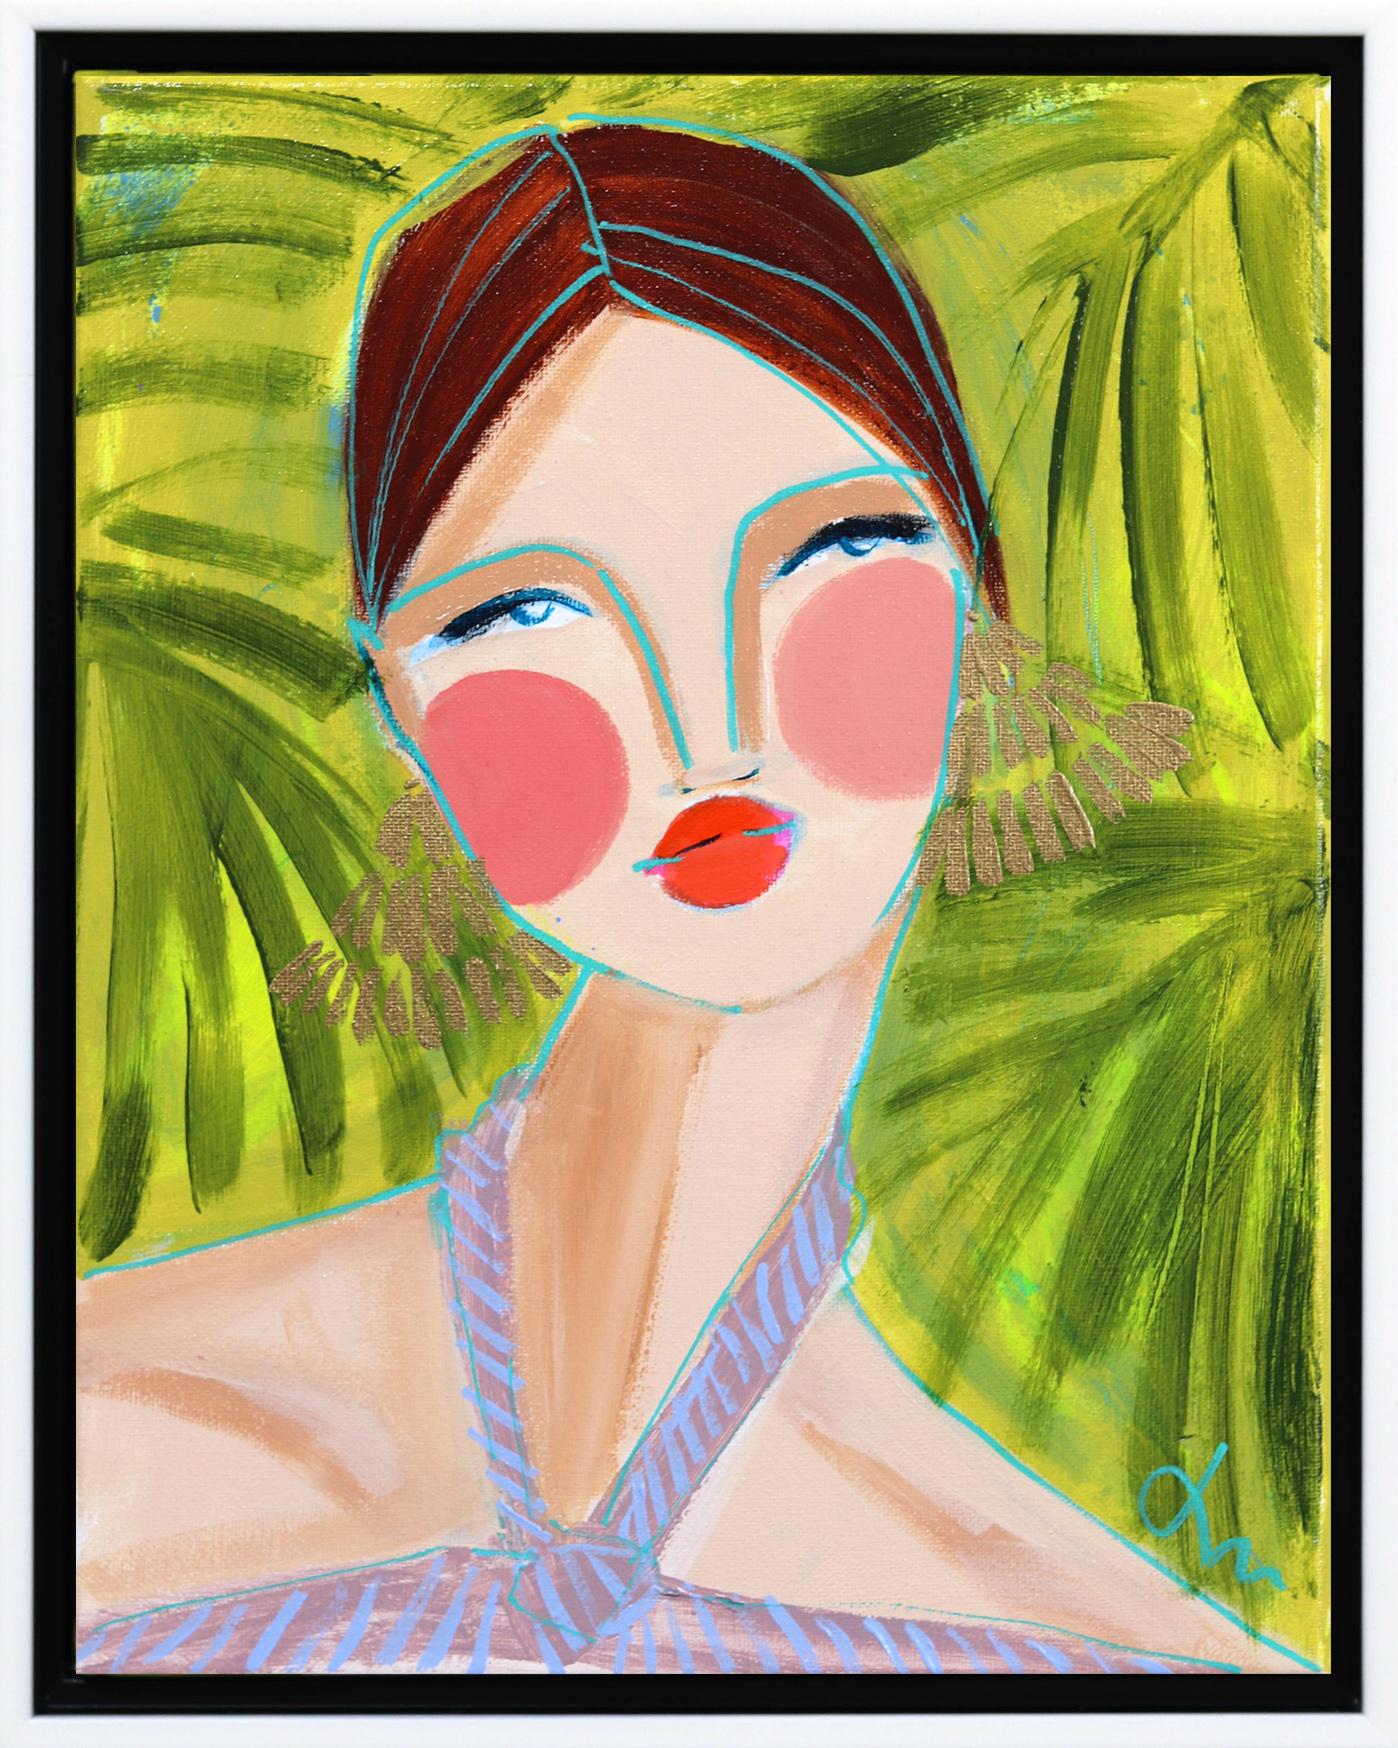 Lindsey McCord Portrait Painting - Miss Priss Palms 2 - Colorful Abstract Figurative Portrait Original Painting